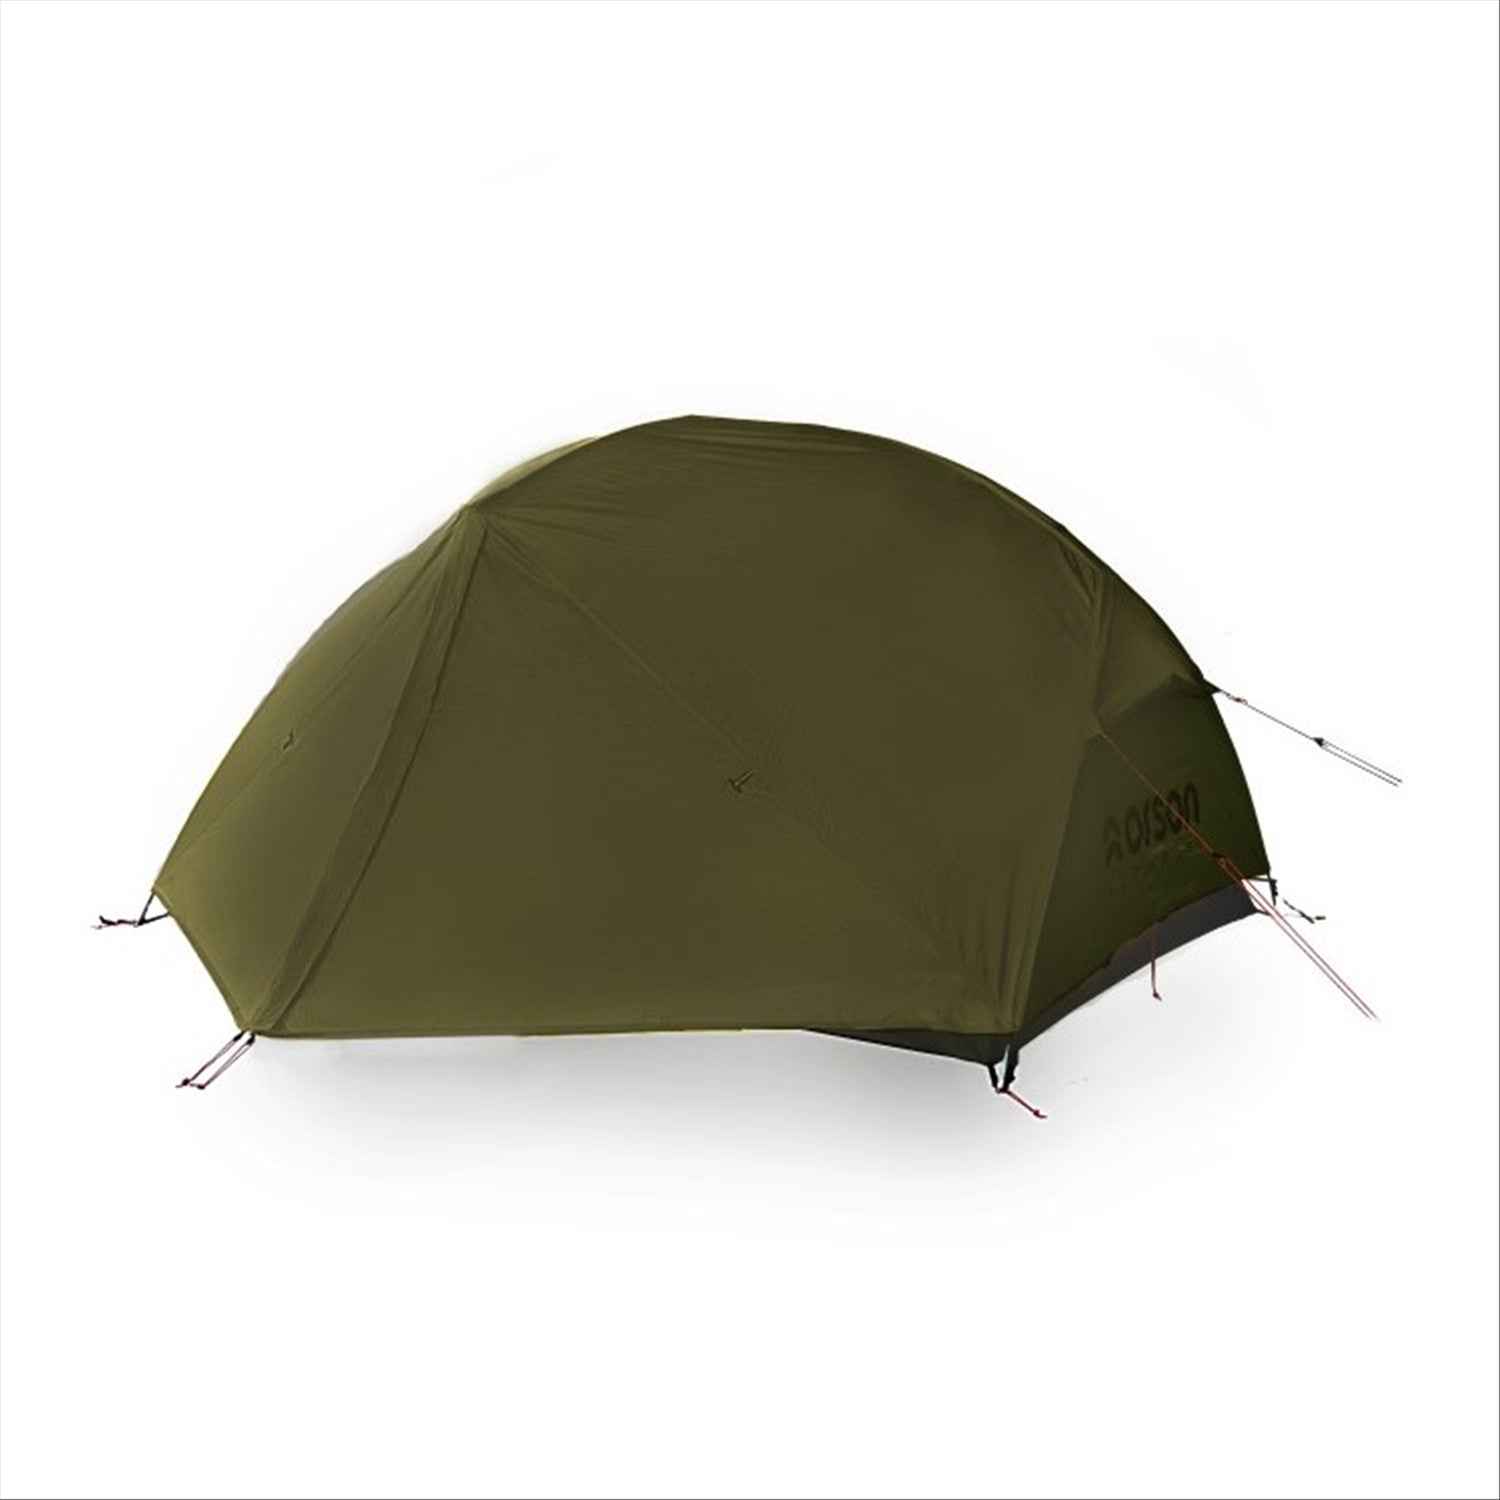 Hopper 2 - Ripstop Polyester Lightweight 2 Person Hiking Tent, 2.5kg